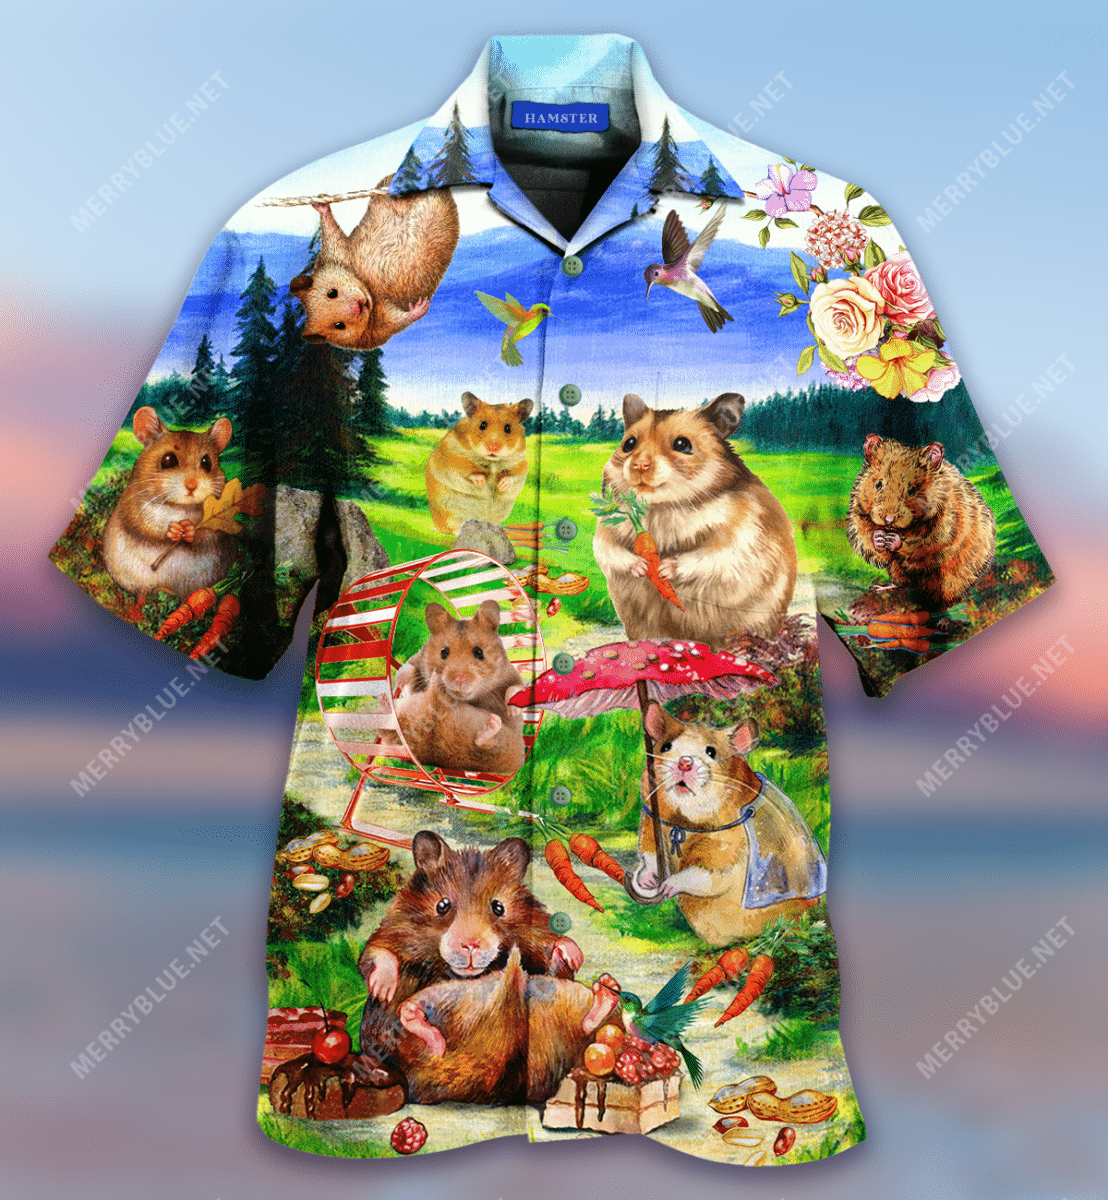 Life Is Better With A Hamster Unisex Hawaiian Shirt